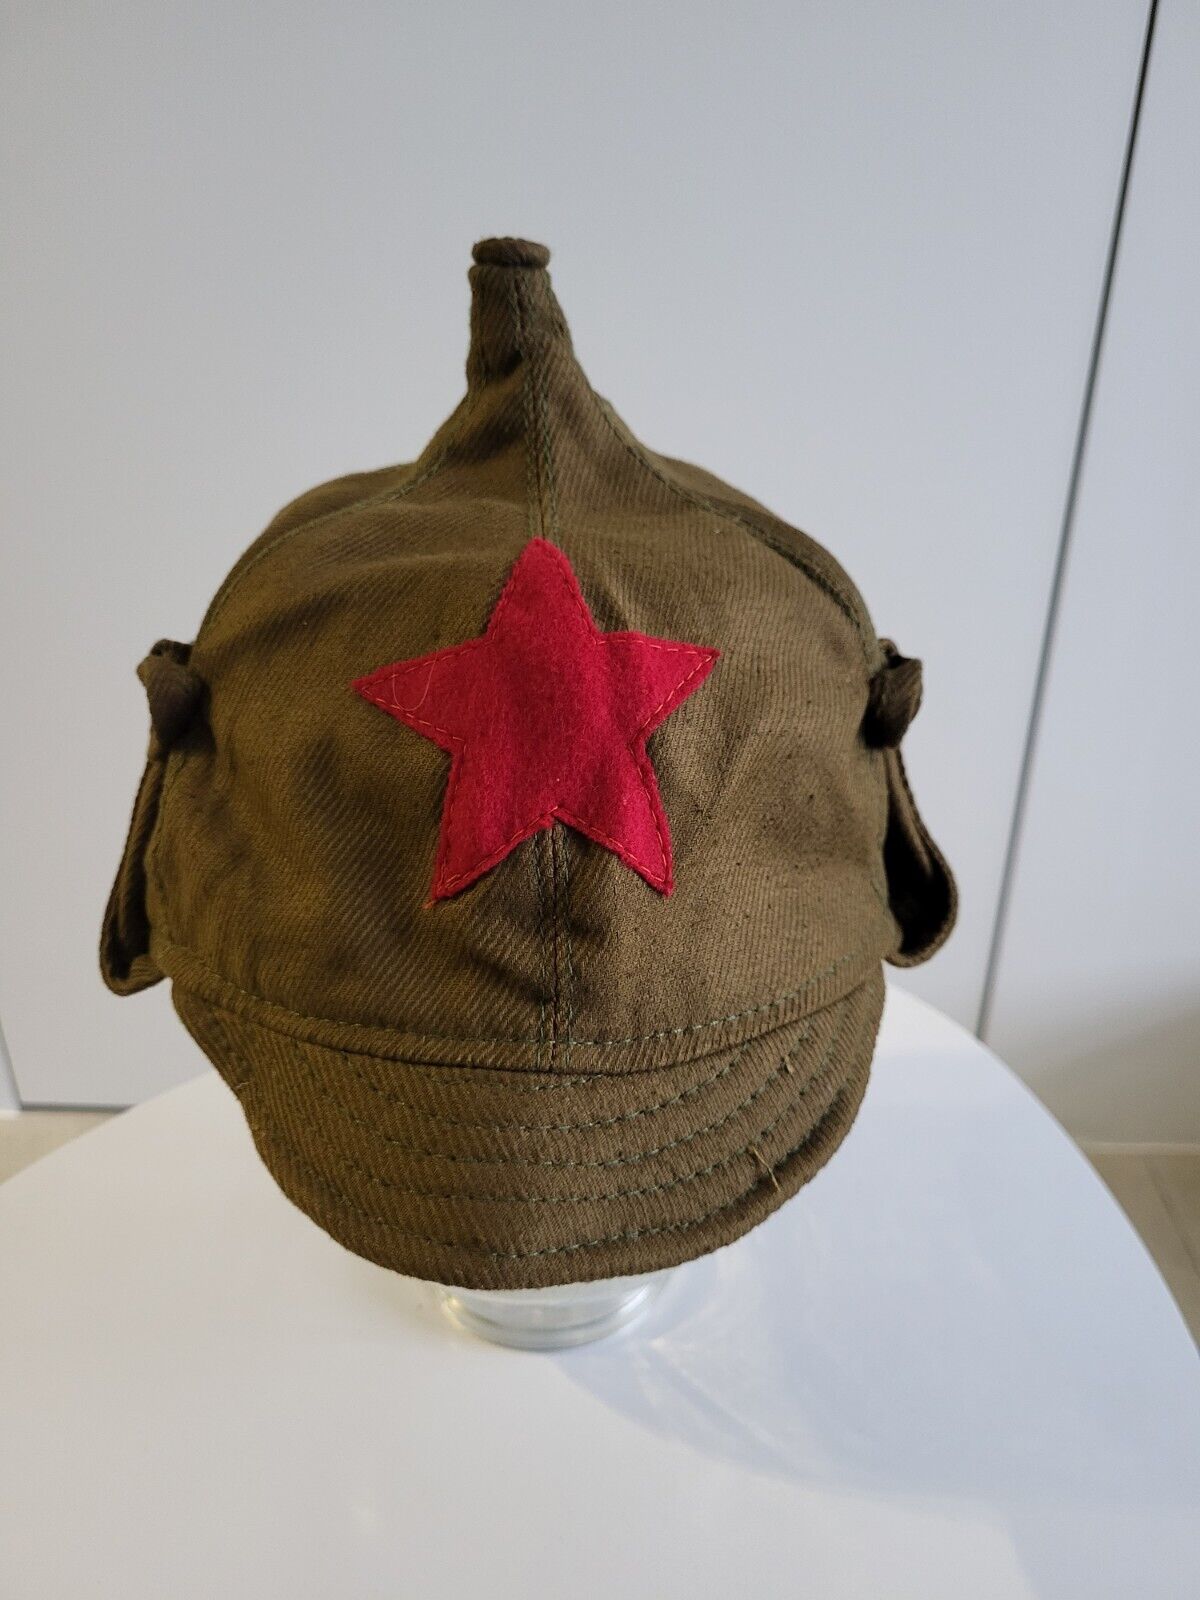 VTG HAT Budenovka ICONIC IMAGE FROM THE Russian Сivil War, Replica, Size L